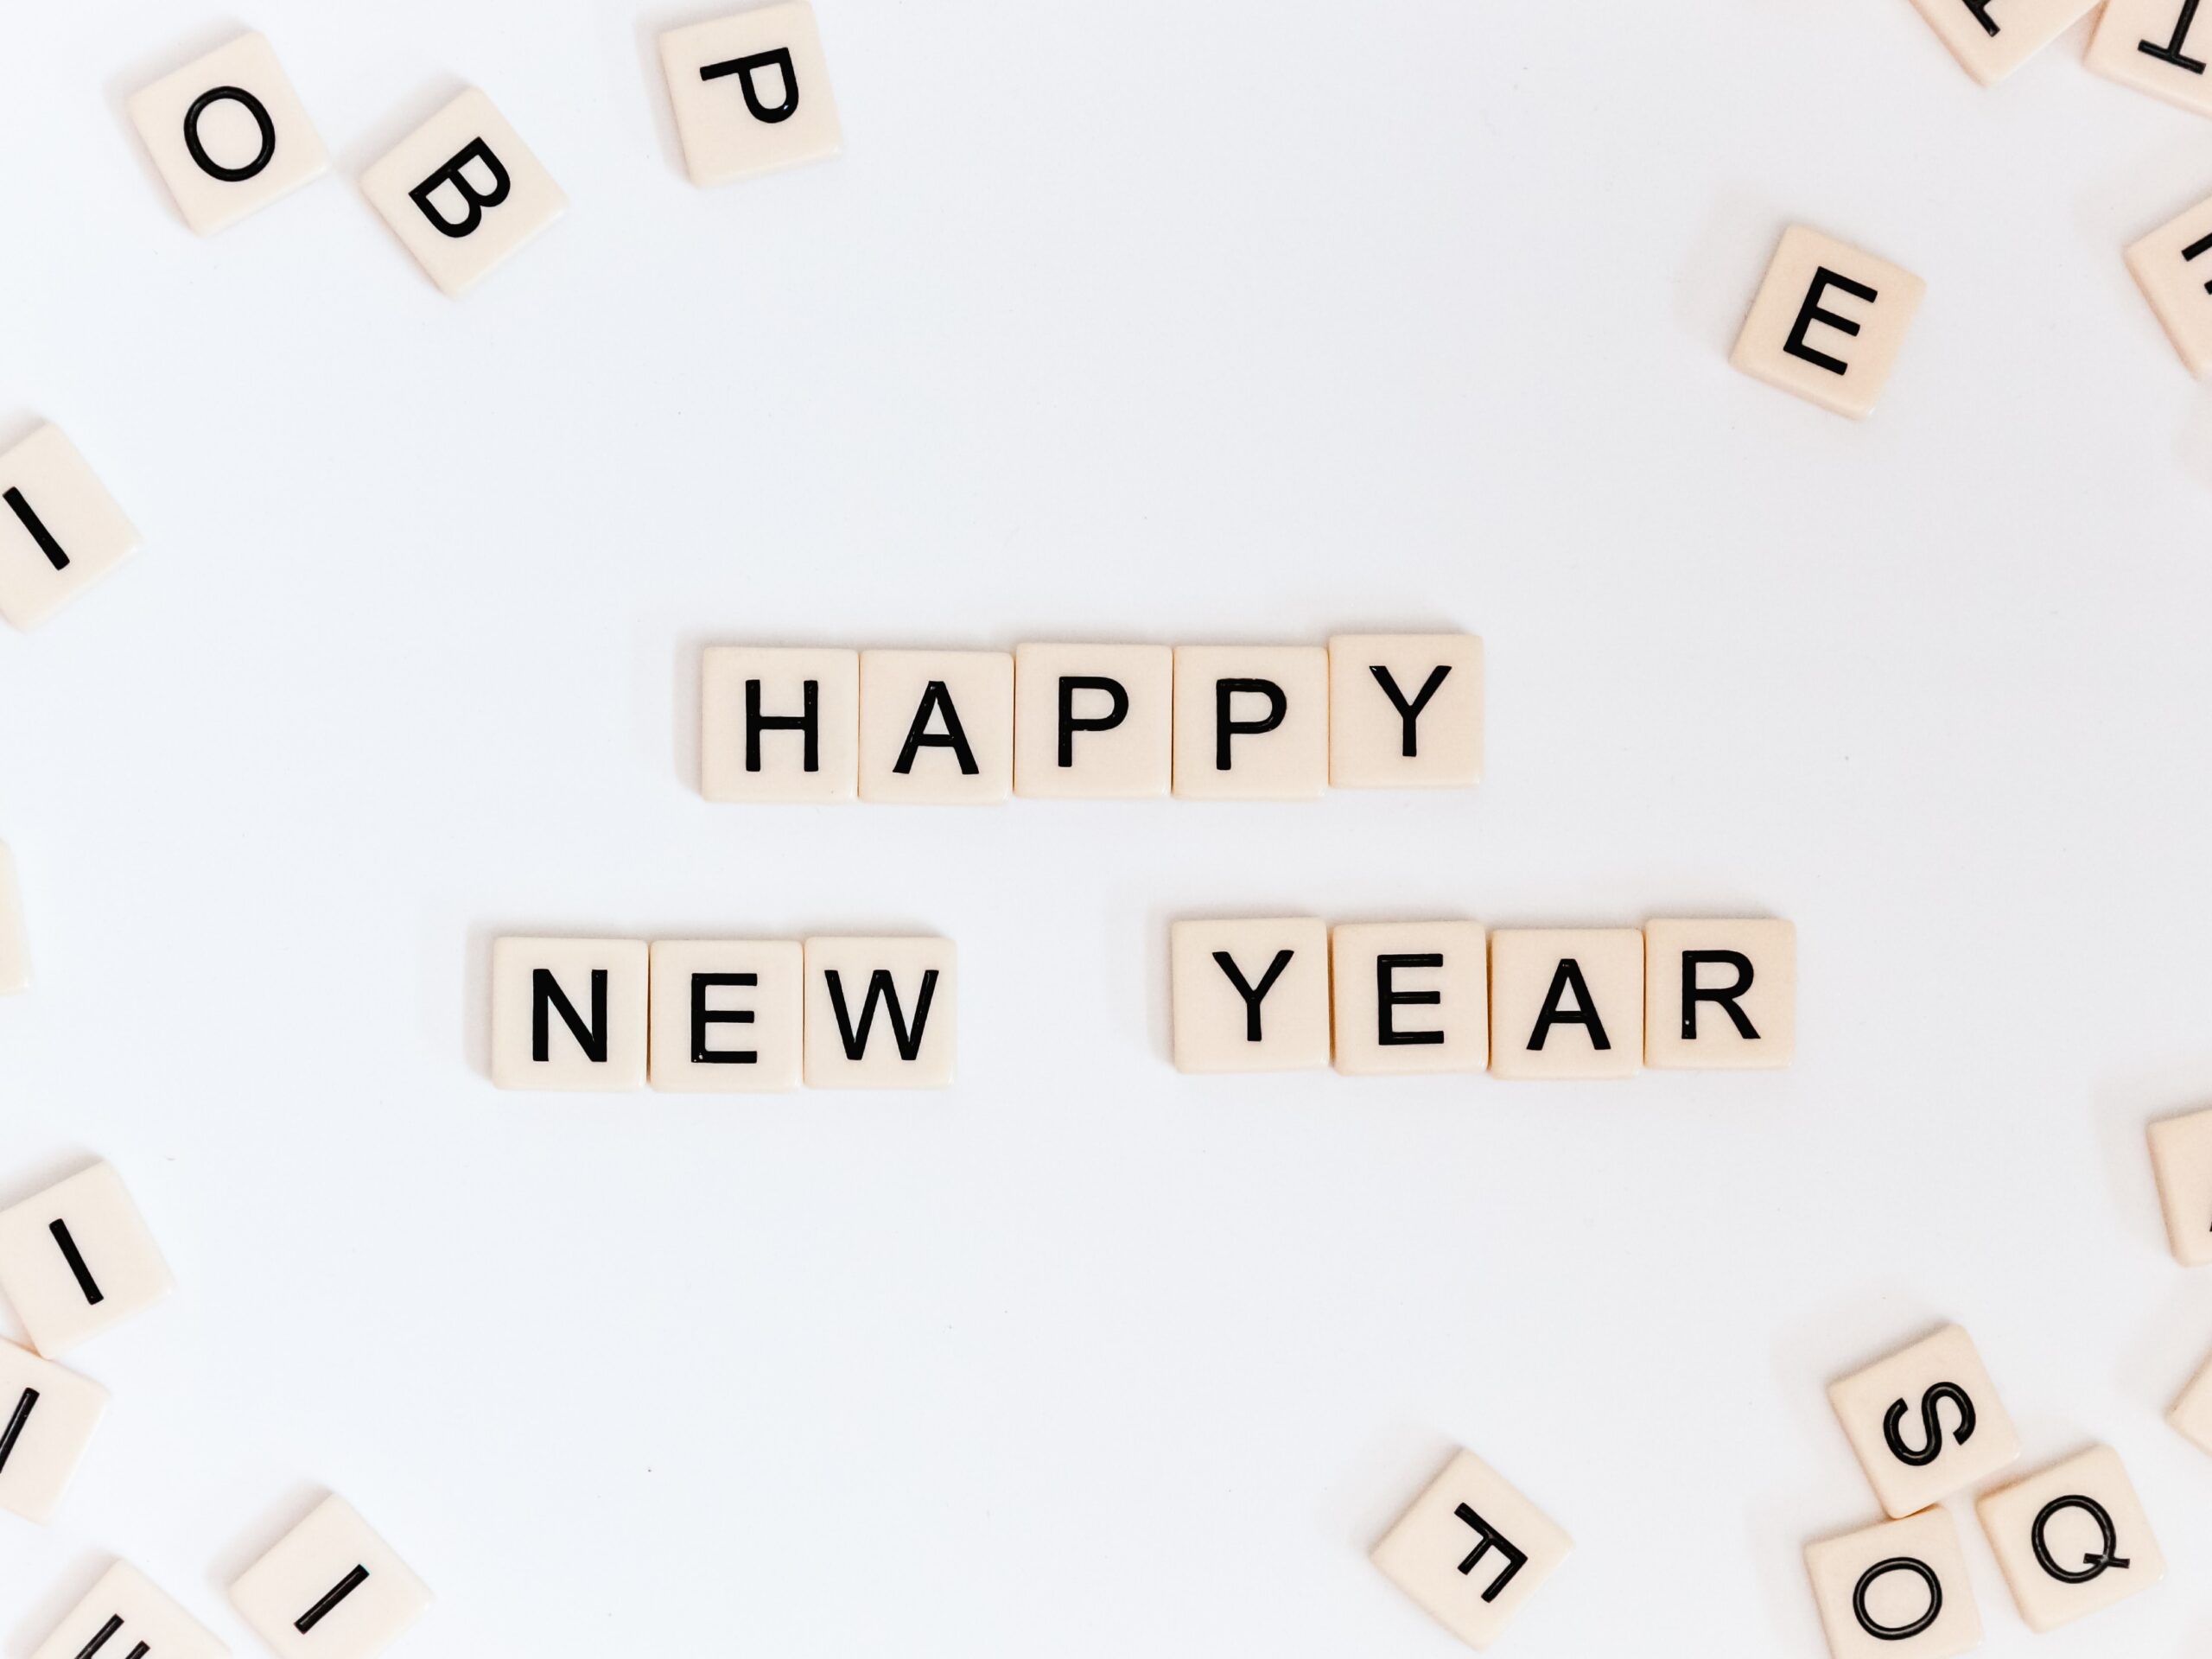 The words happy new year spelled out in scrabble blocks